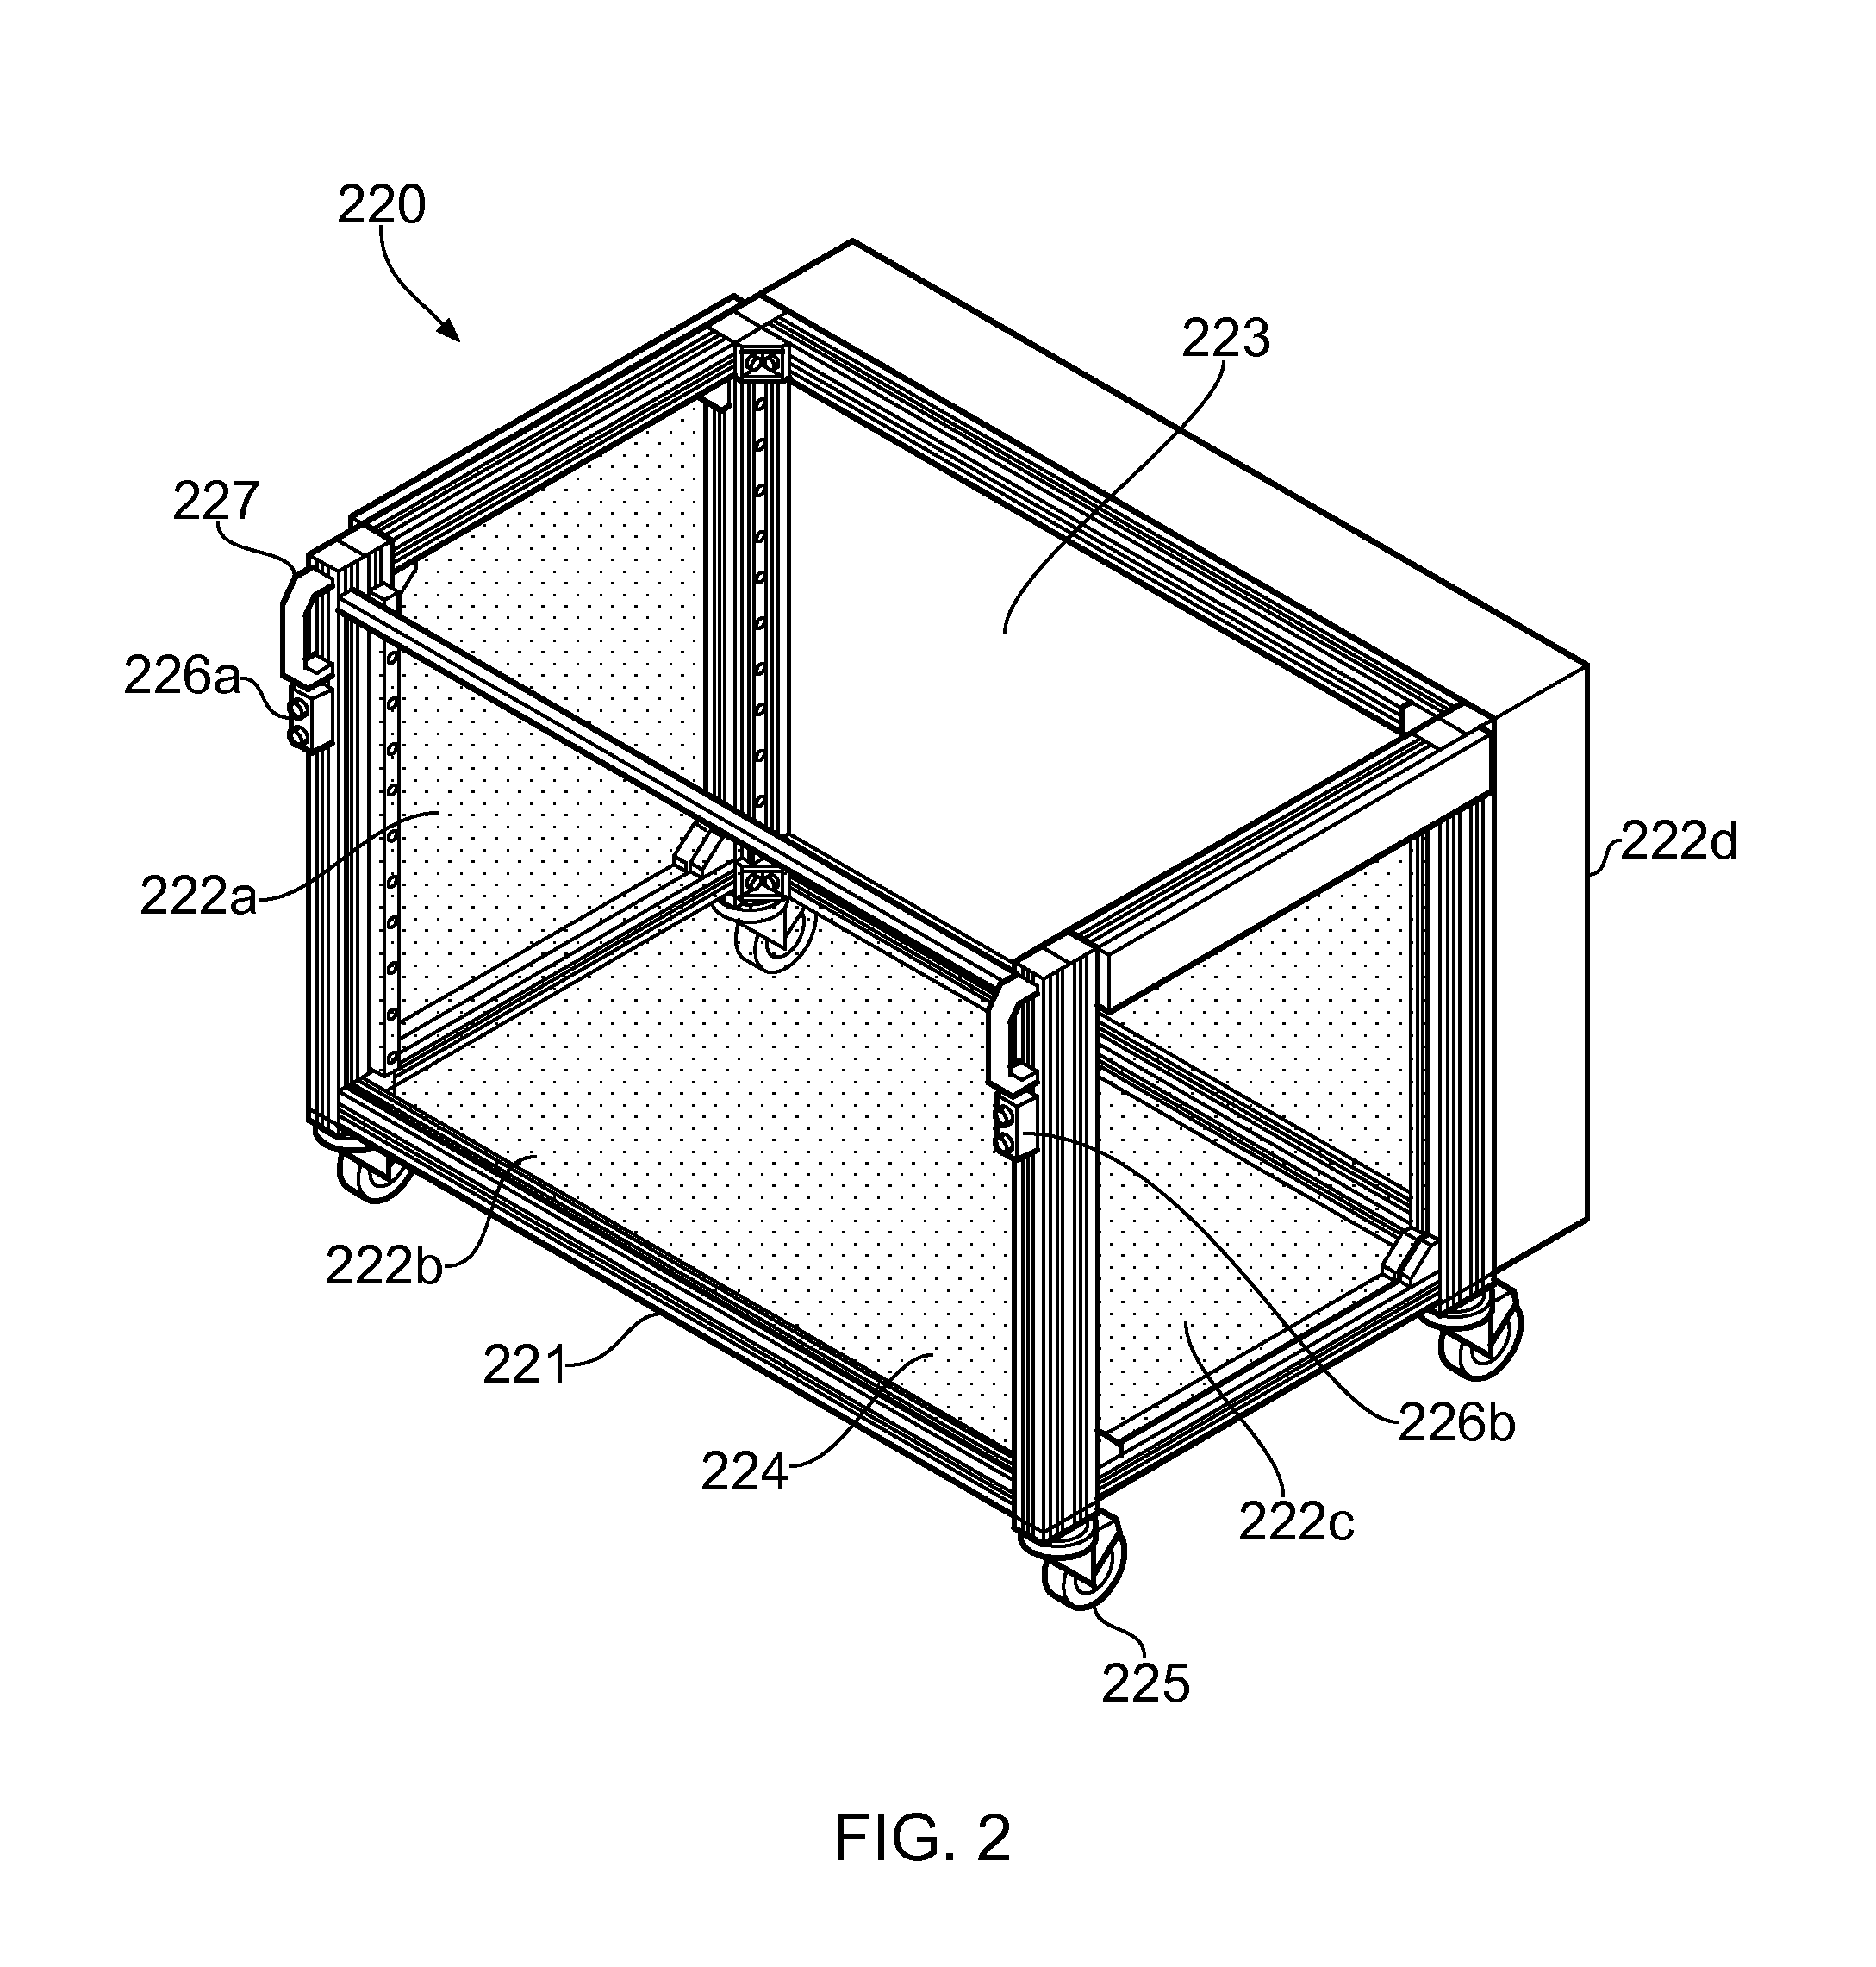 Cell culturing and/or biomanufacturing system